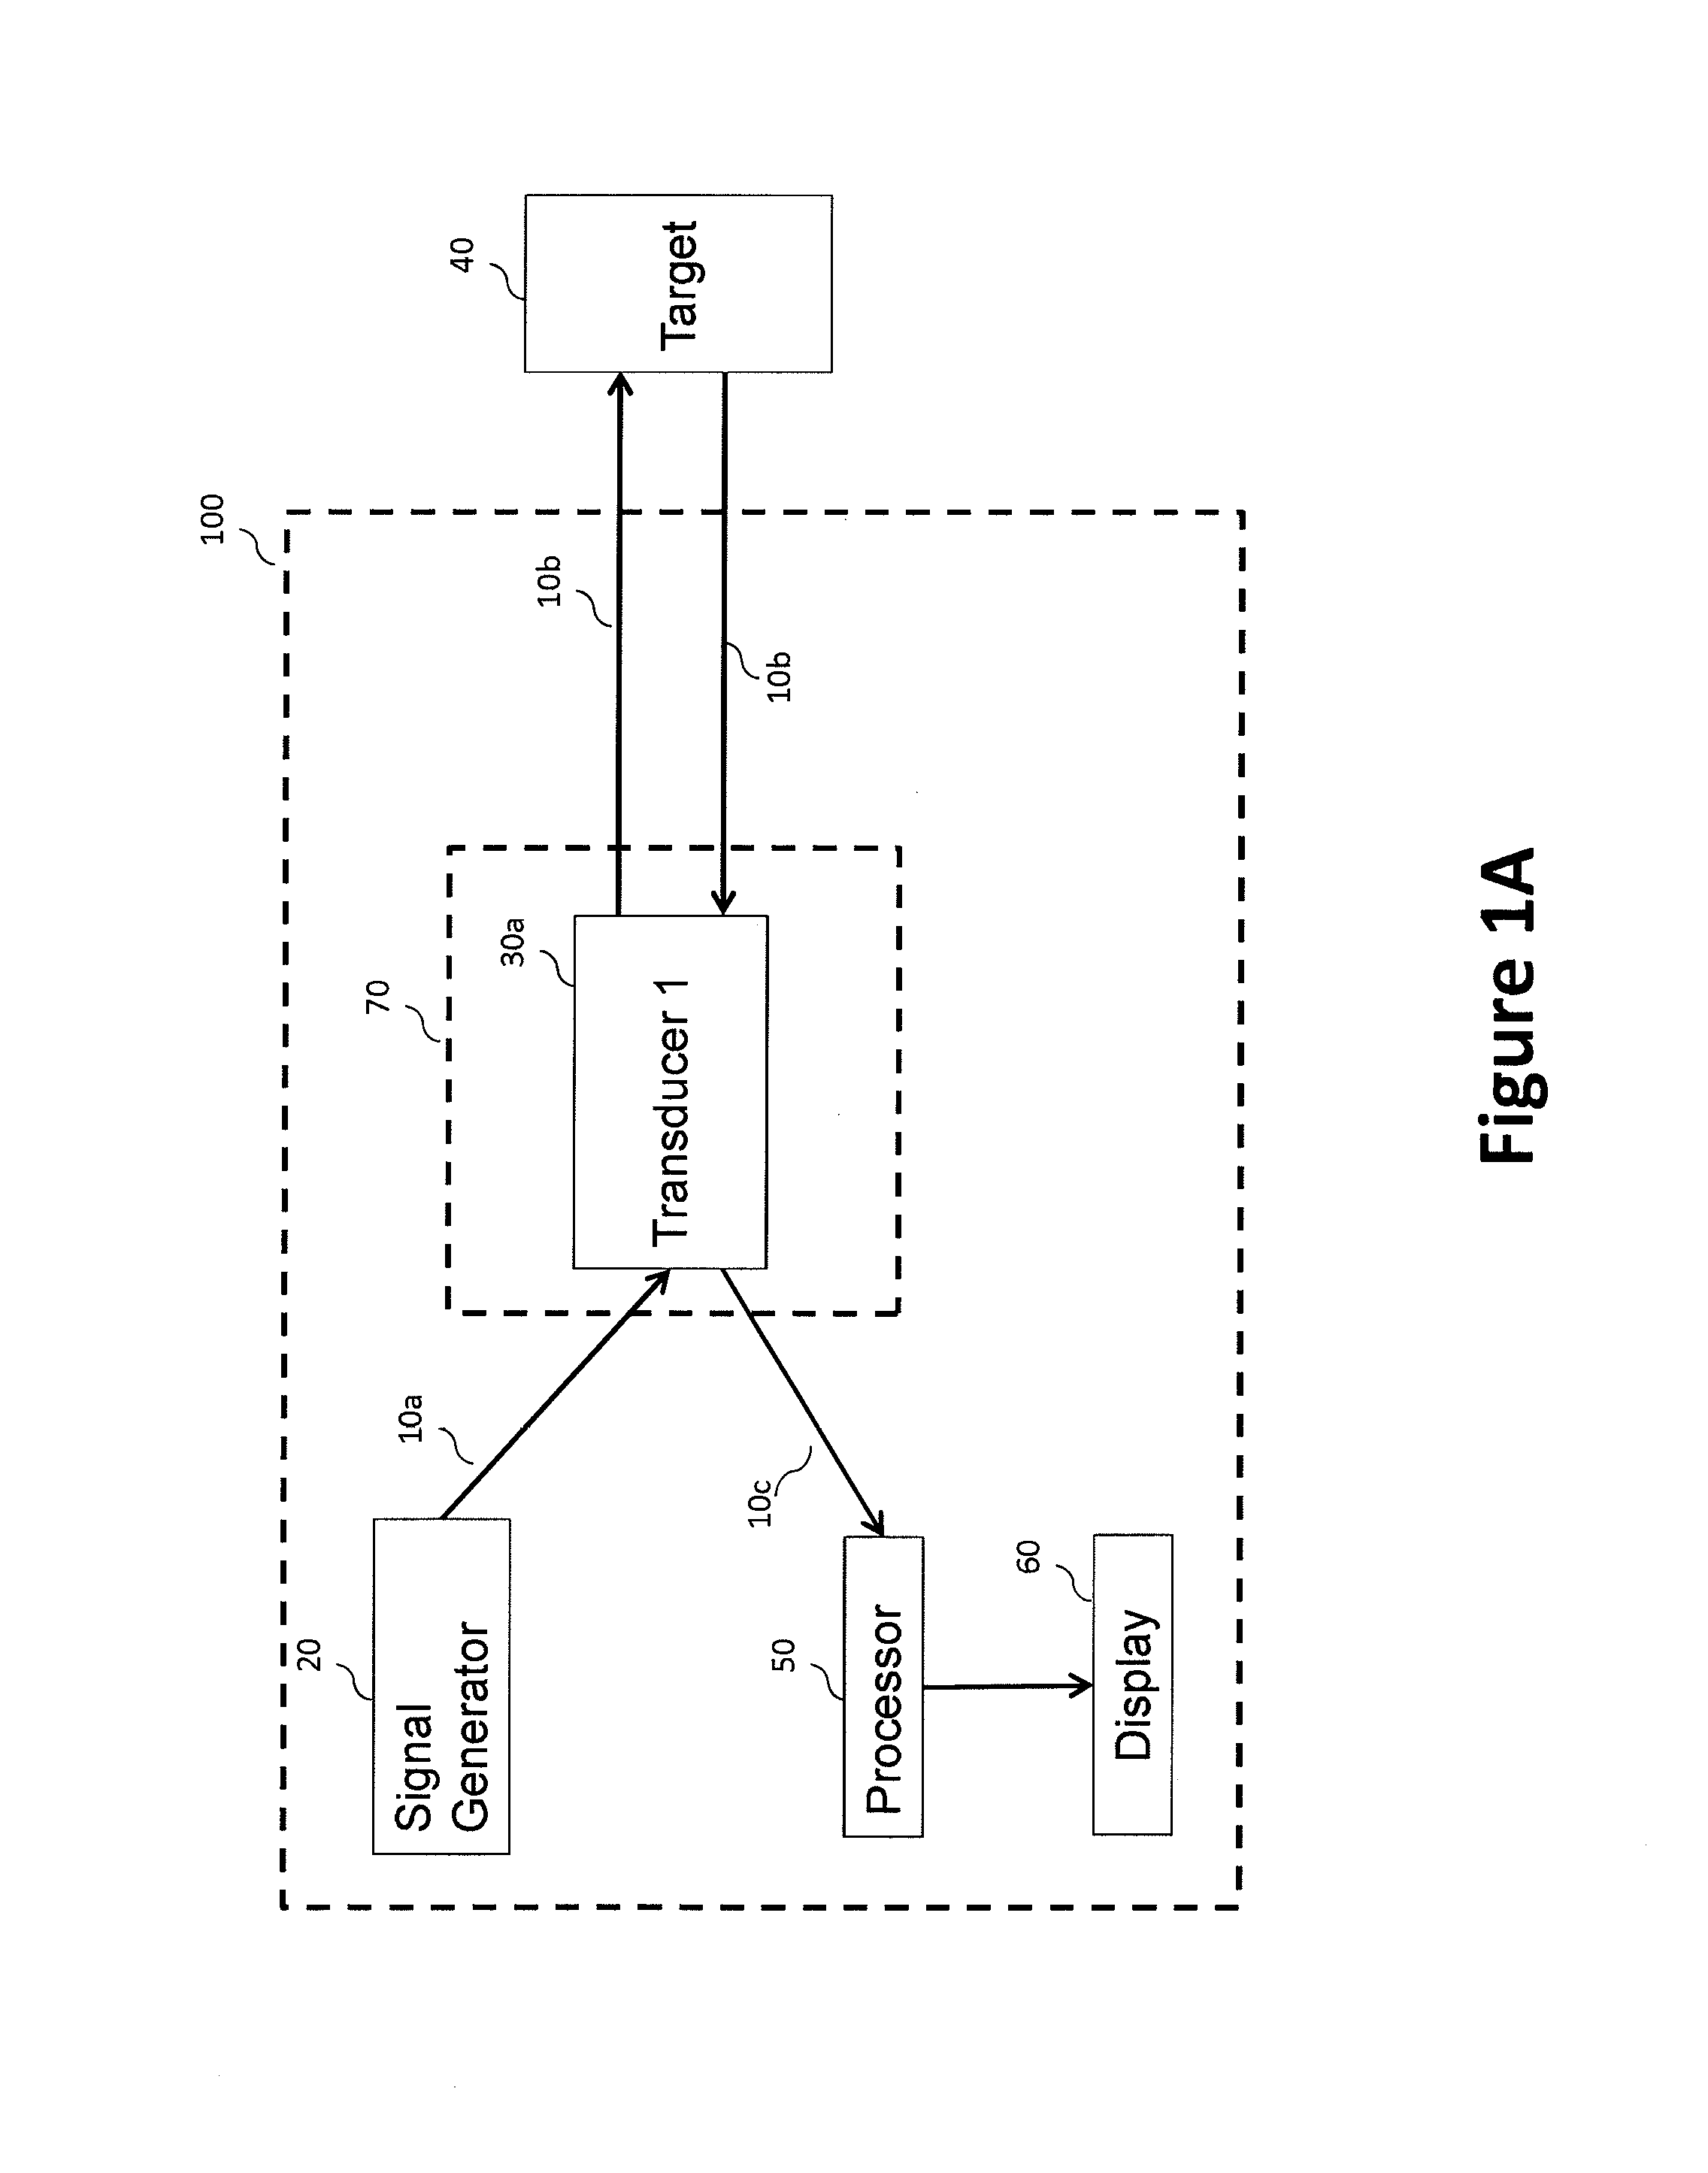 Pulse compression systems and methods